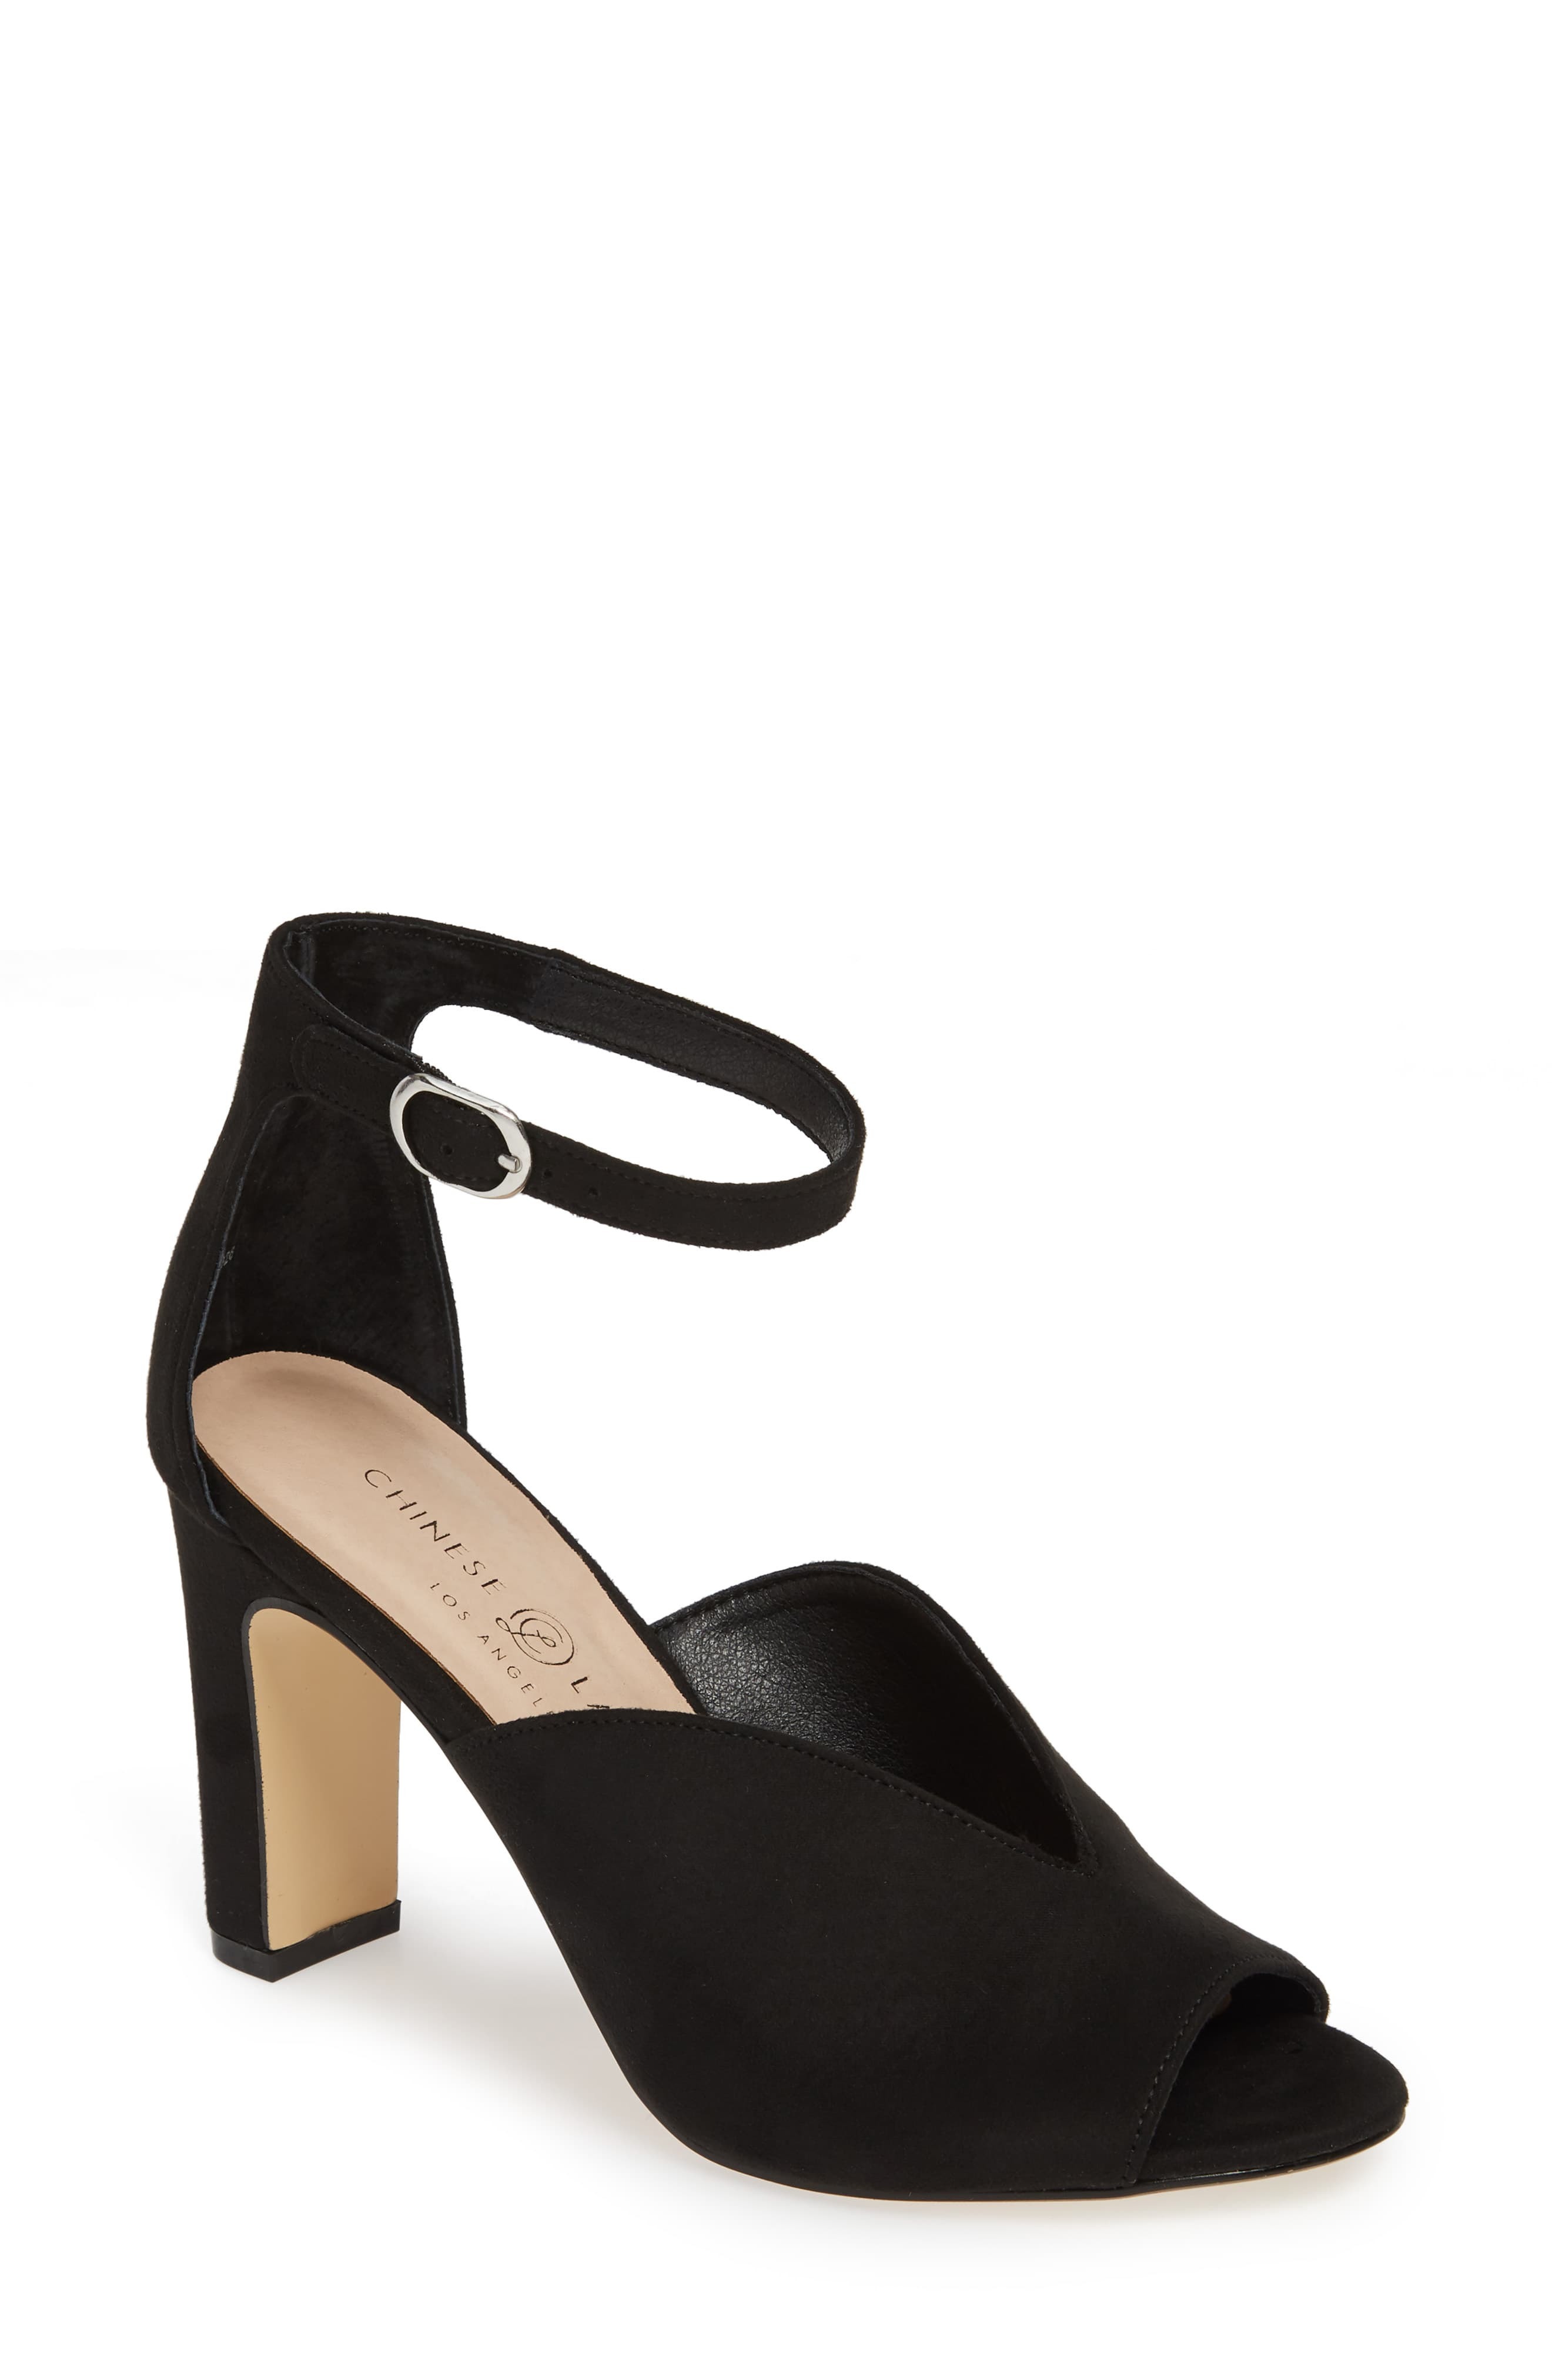 Chinese Laundry Starley Sandal, $49 | Nordstrom | Lookastic